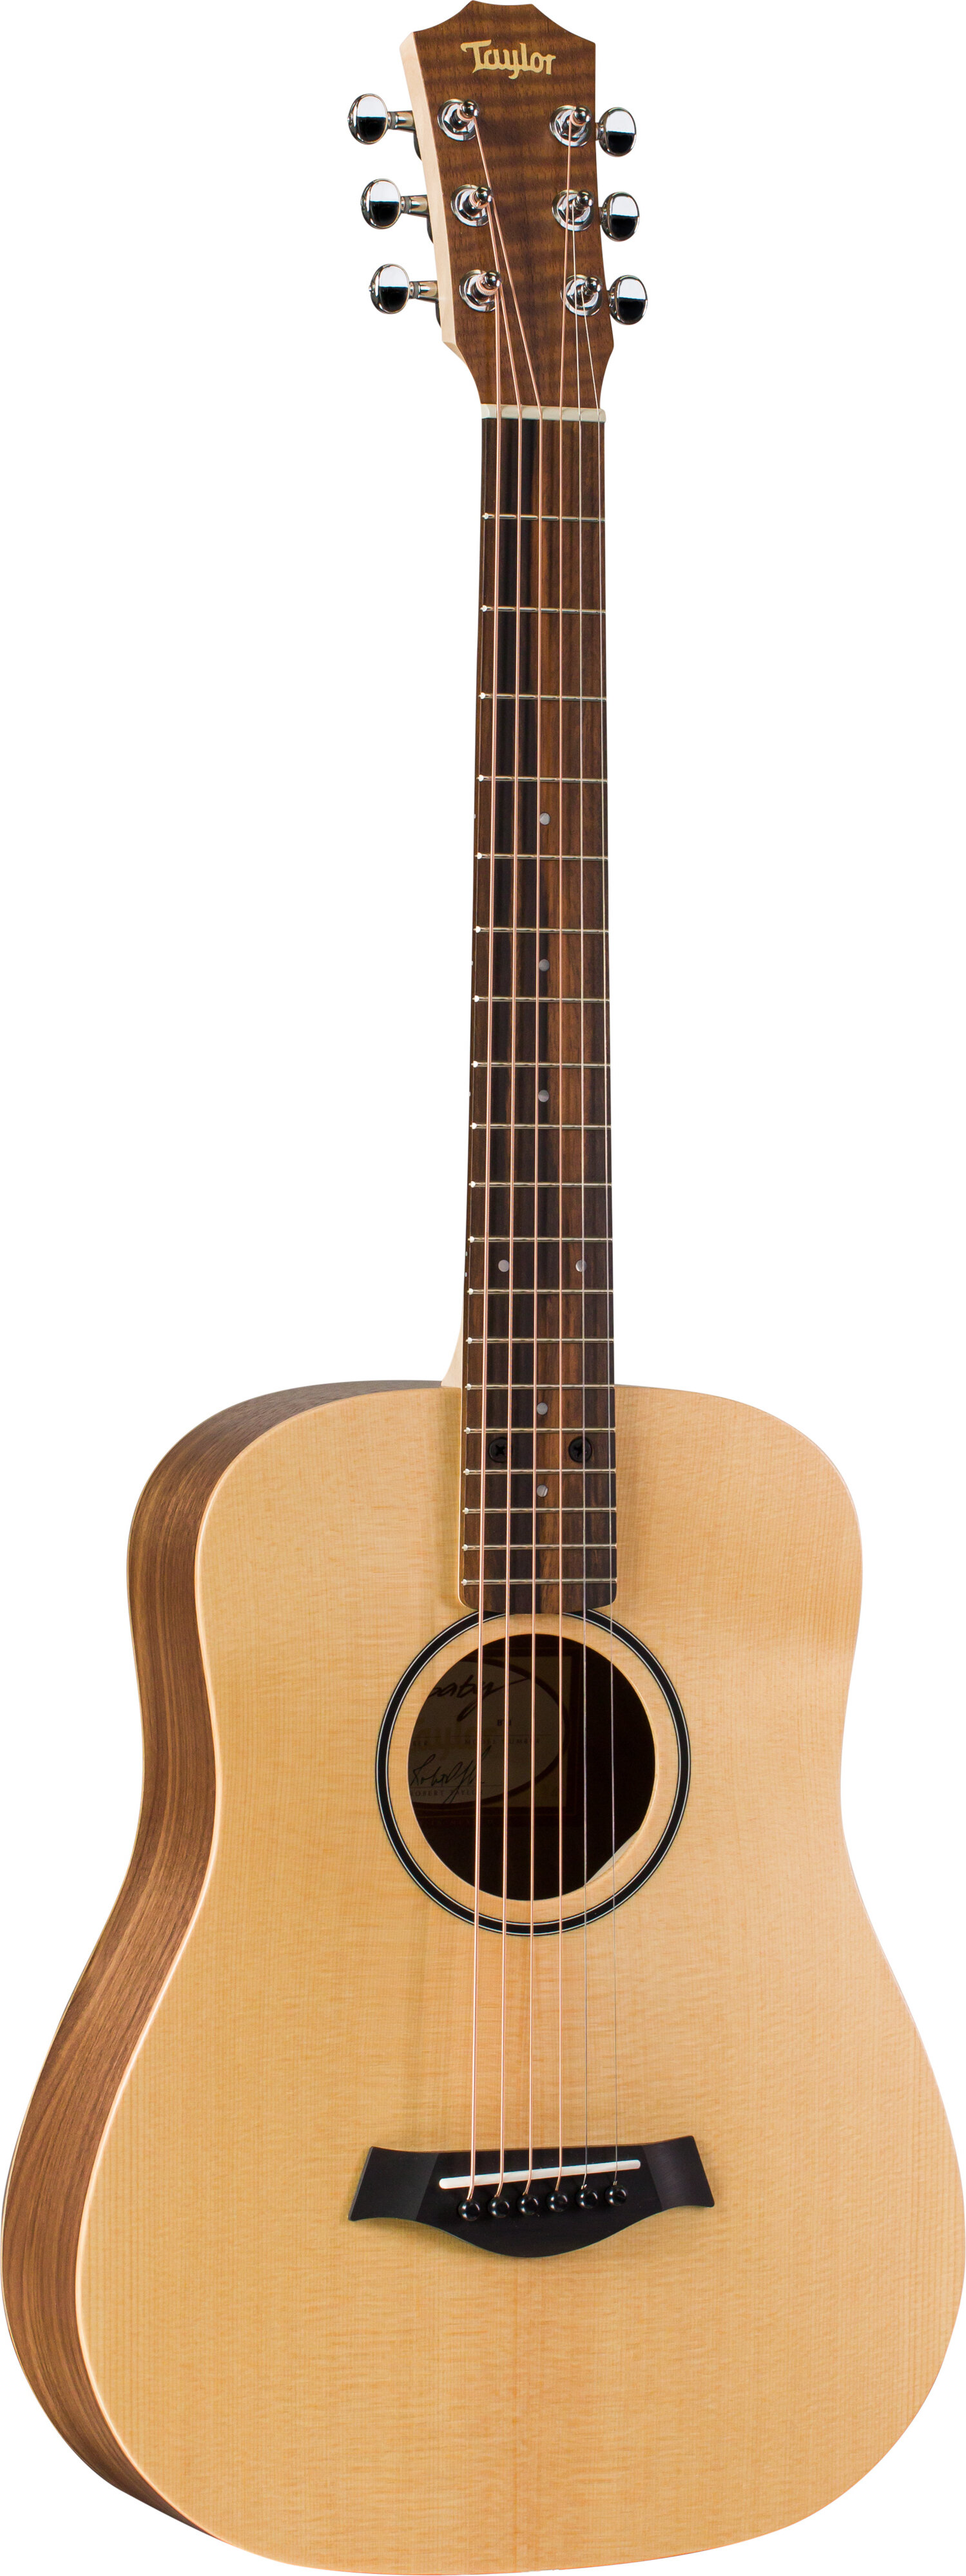 Taylor BT1-W Baby Taylor 3/4 Size Acoustic Guitar -  Taylor Guitars